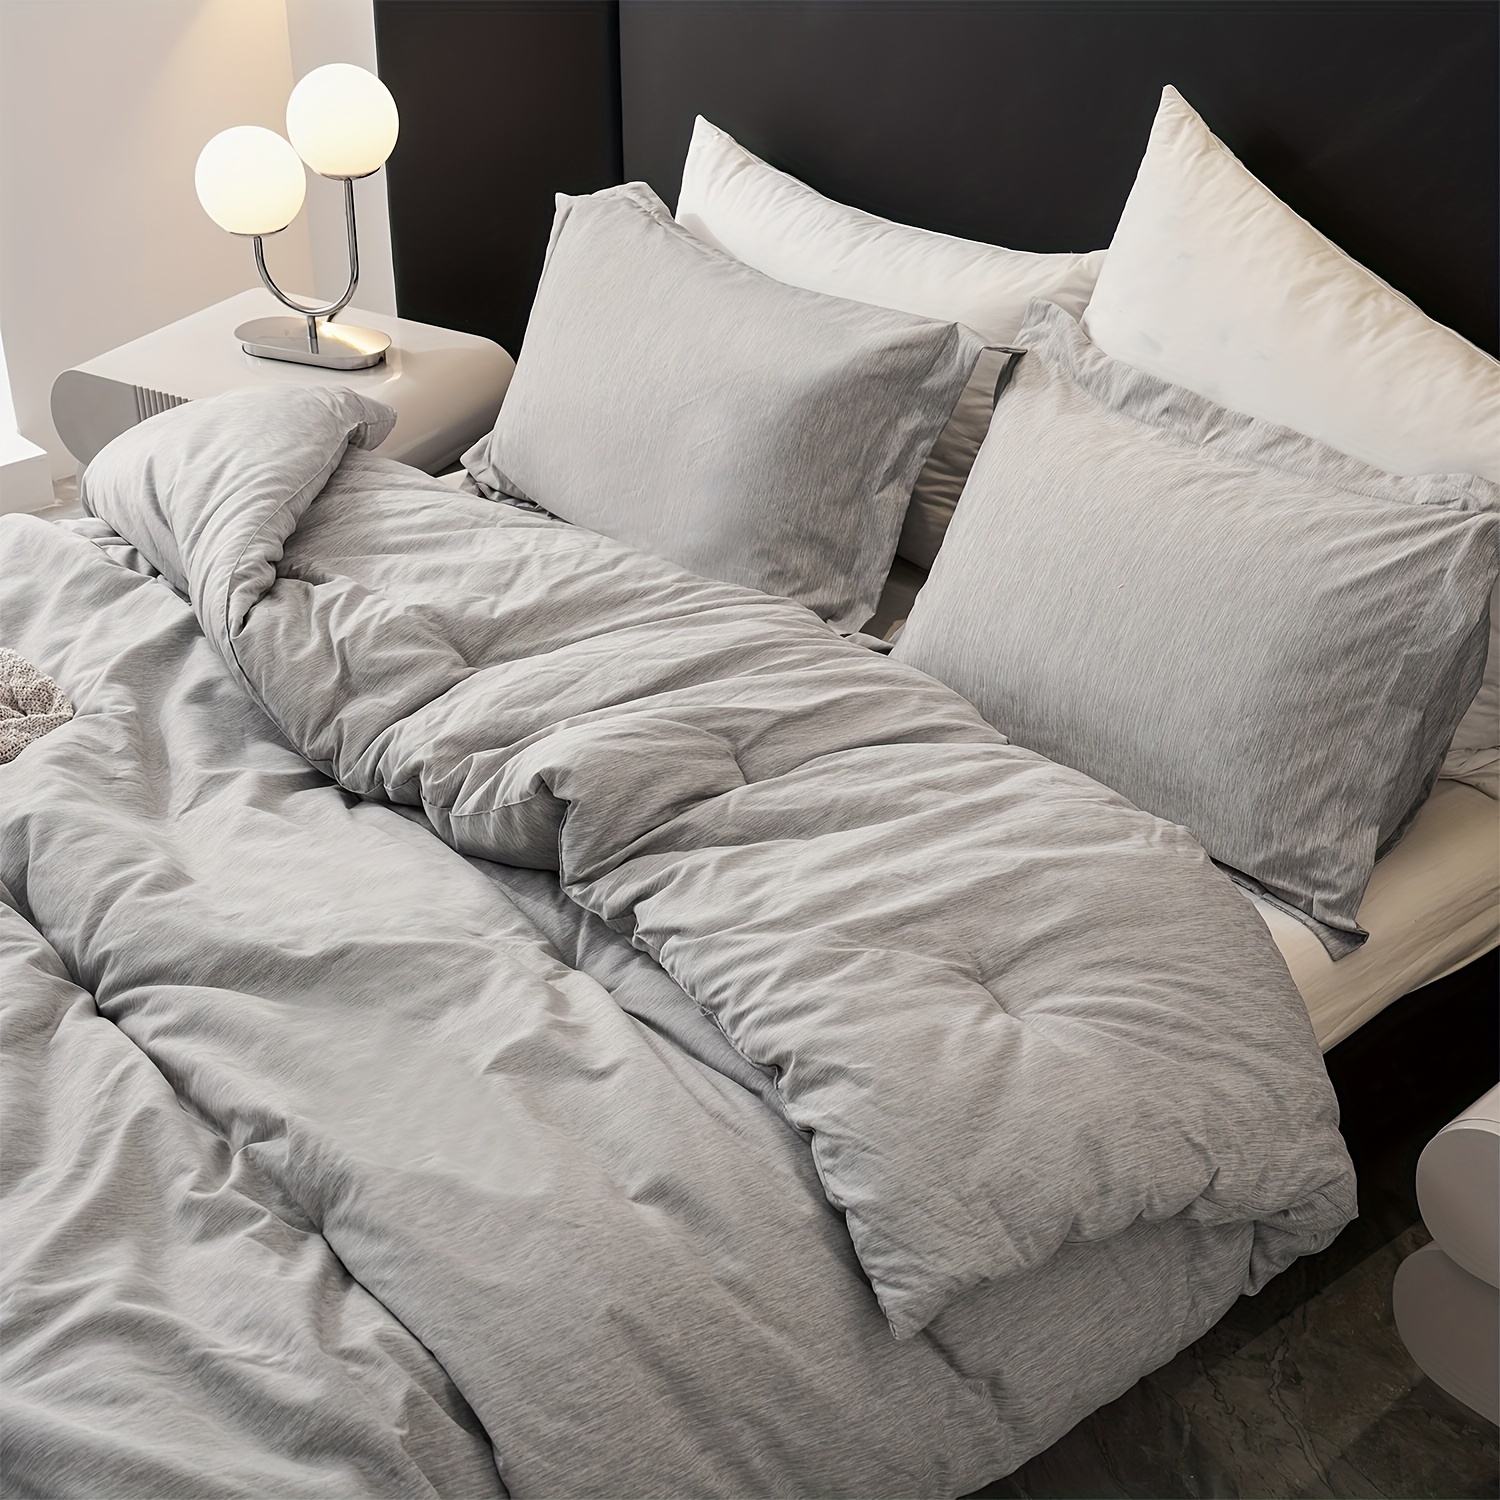 

Downcool All Season 2/3 Pieces Bedding Comforter Sets, Cationic Dyed Bed Set With Comforter & Pillow Sham